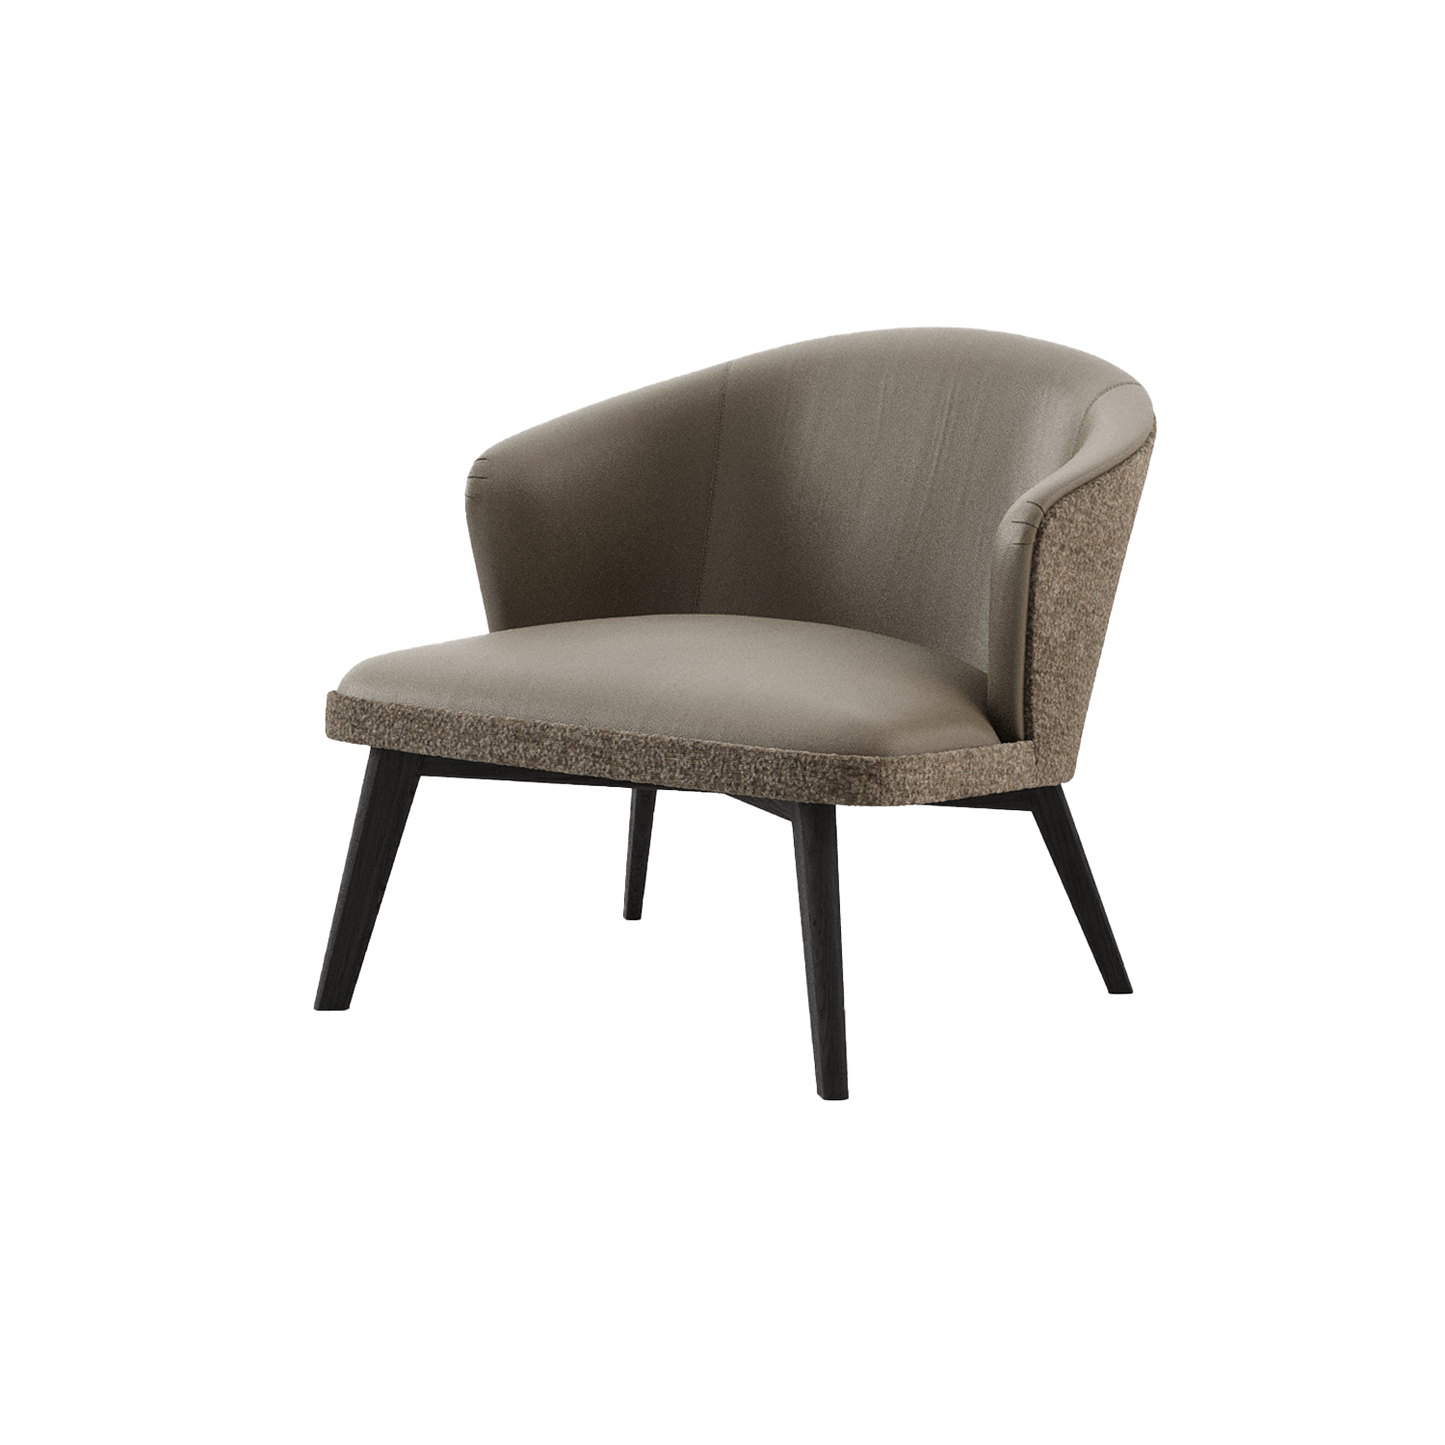 Nelly Armchair | Laskasas | Lounge Chairs | nelly-armchair